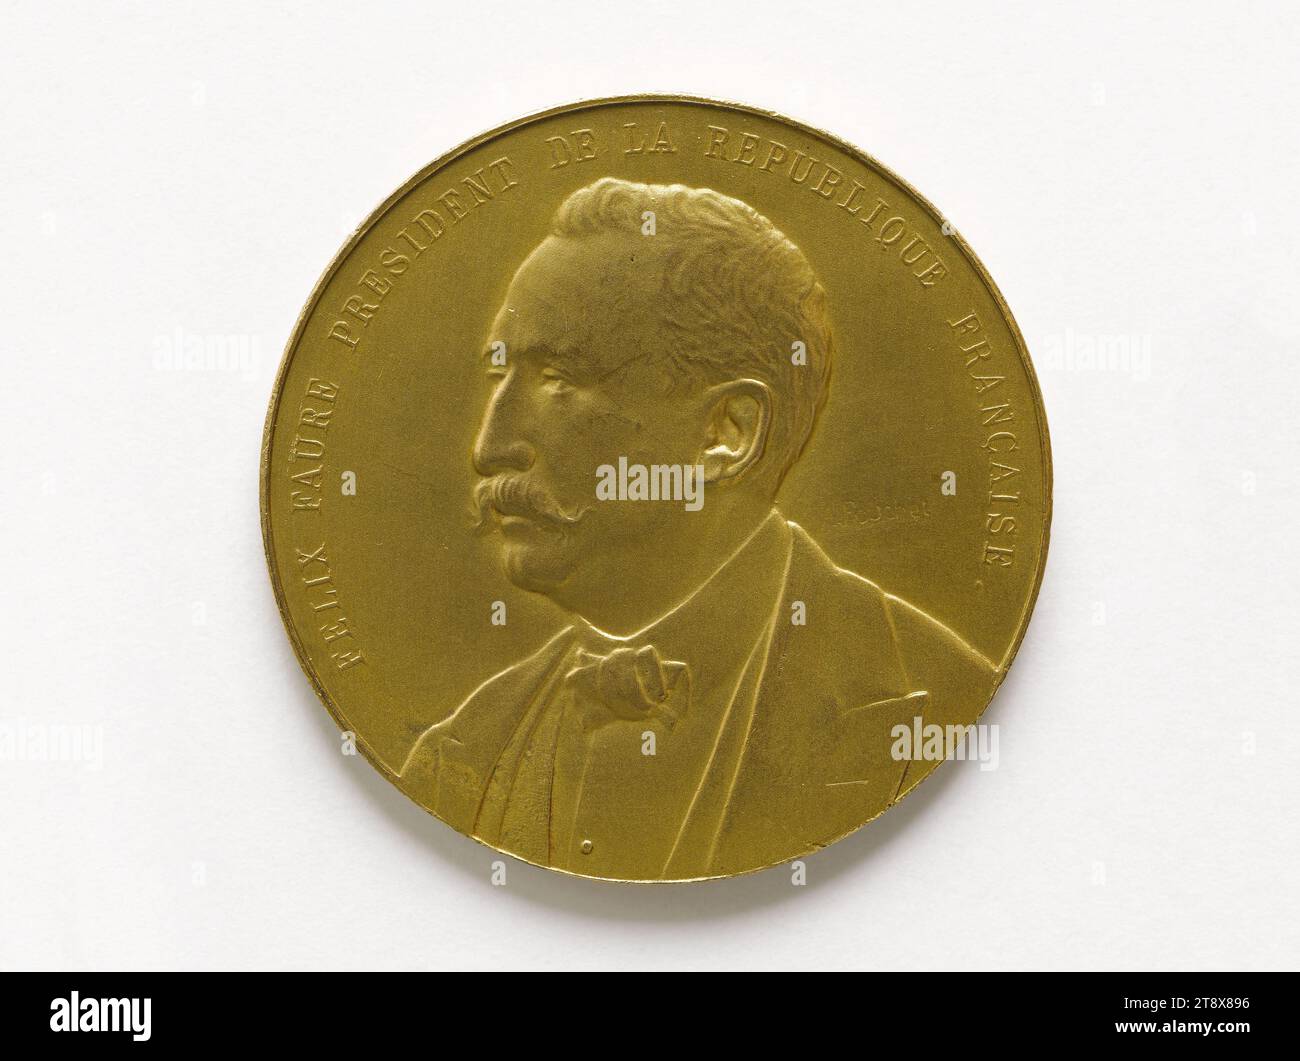 Félix Faure (1841-1899), President of the Republic (1895-1899), 1895, Fouchet, A., Engraver in medals, Array, Numismatics, Medal, Dimensions - Work: Diameter: 4 cm, Weight (type dimension): 21.34 g Stock Photo